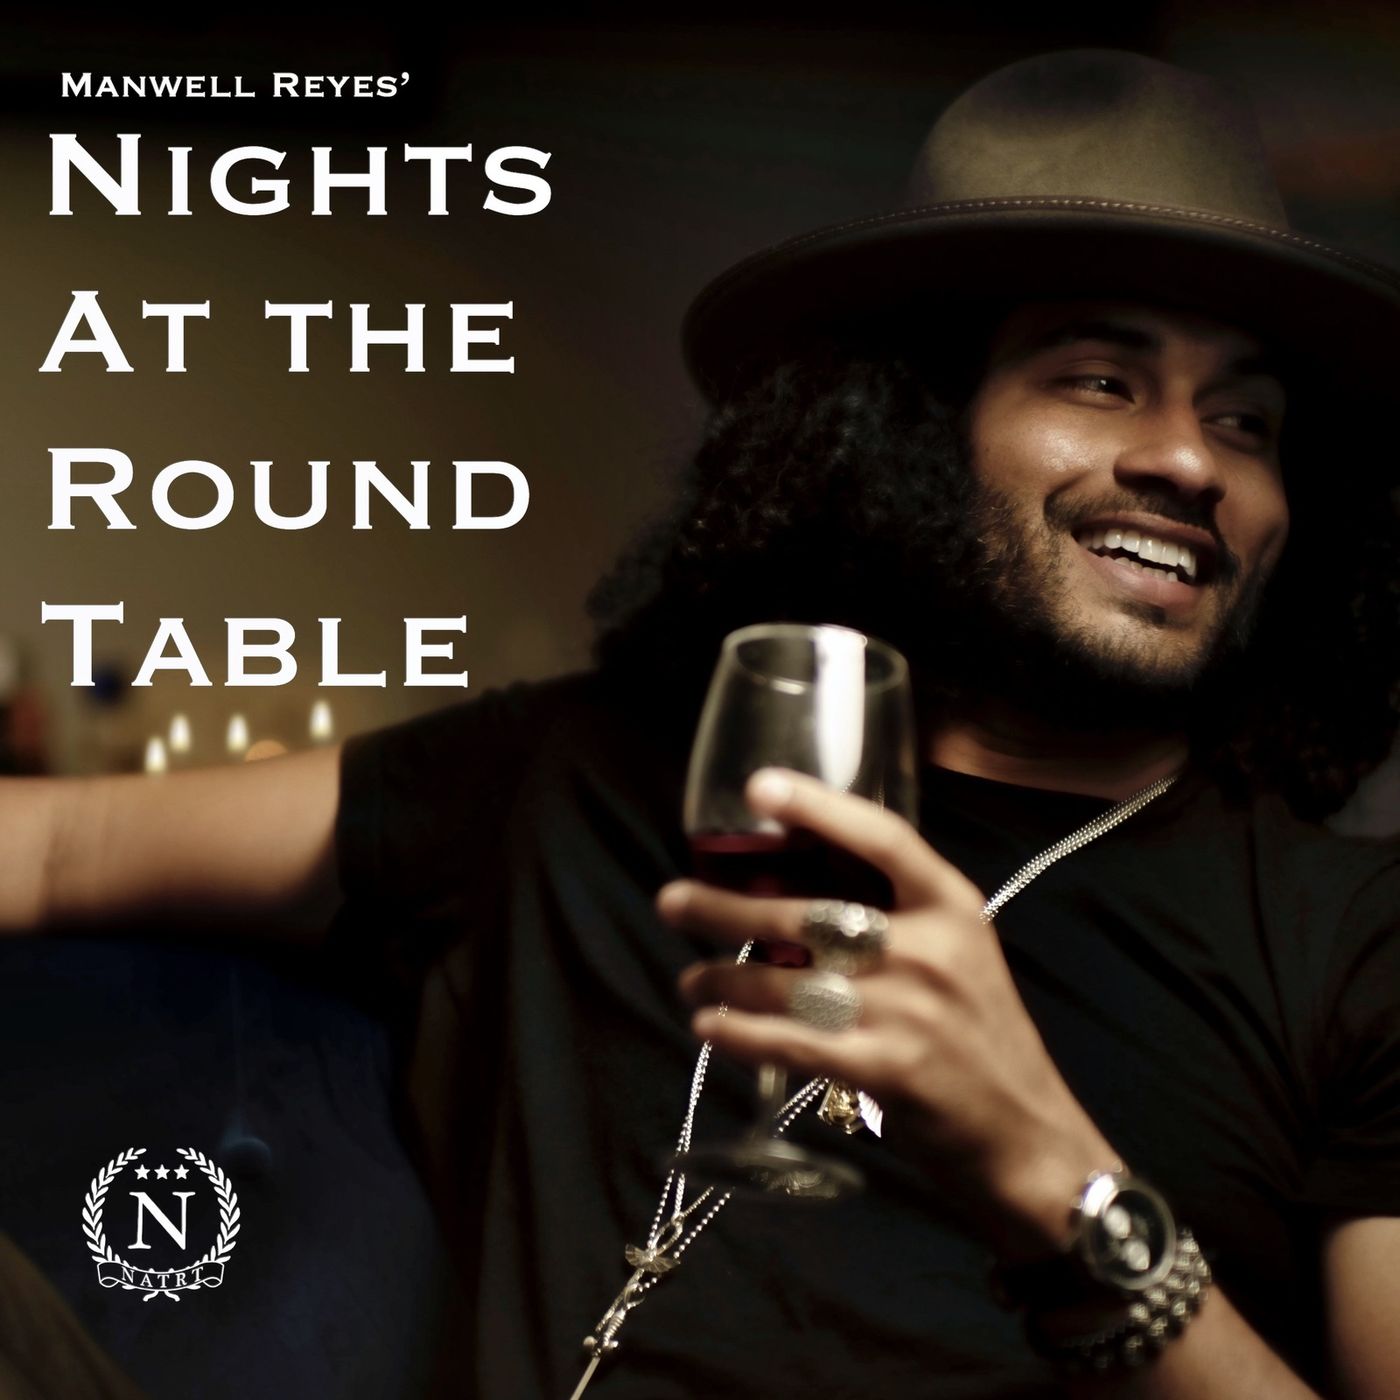 Nights At The Round Table Pod / Discussing the Hillsong Church Documentary  BONUS EPISODE- Nights at the Round Table